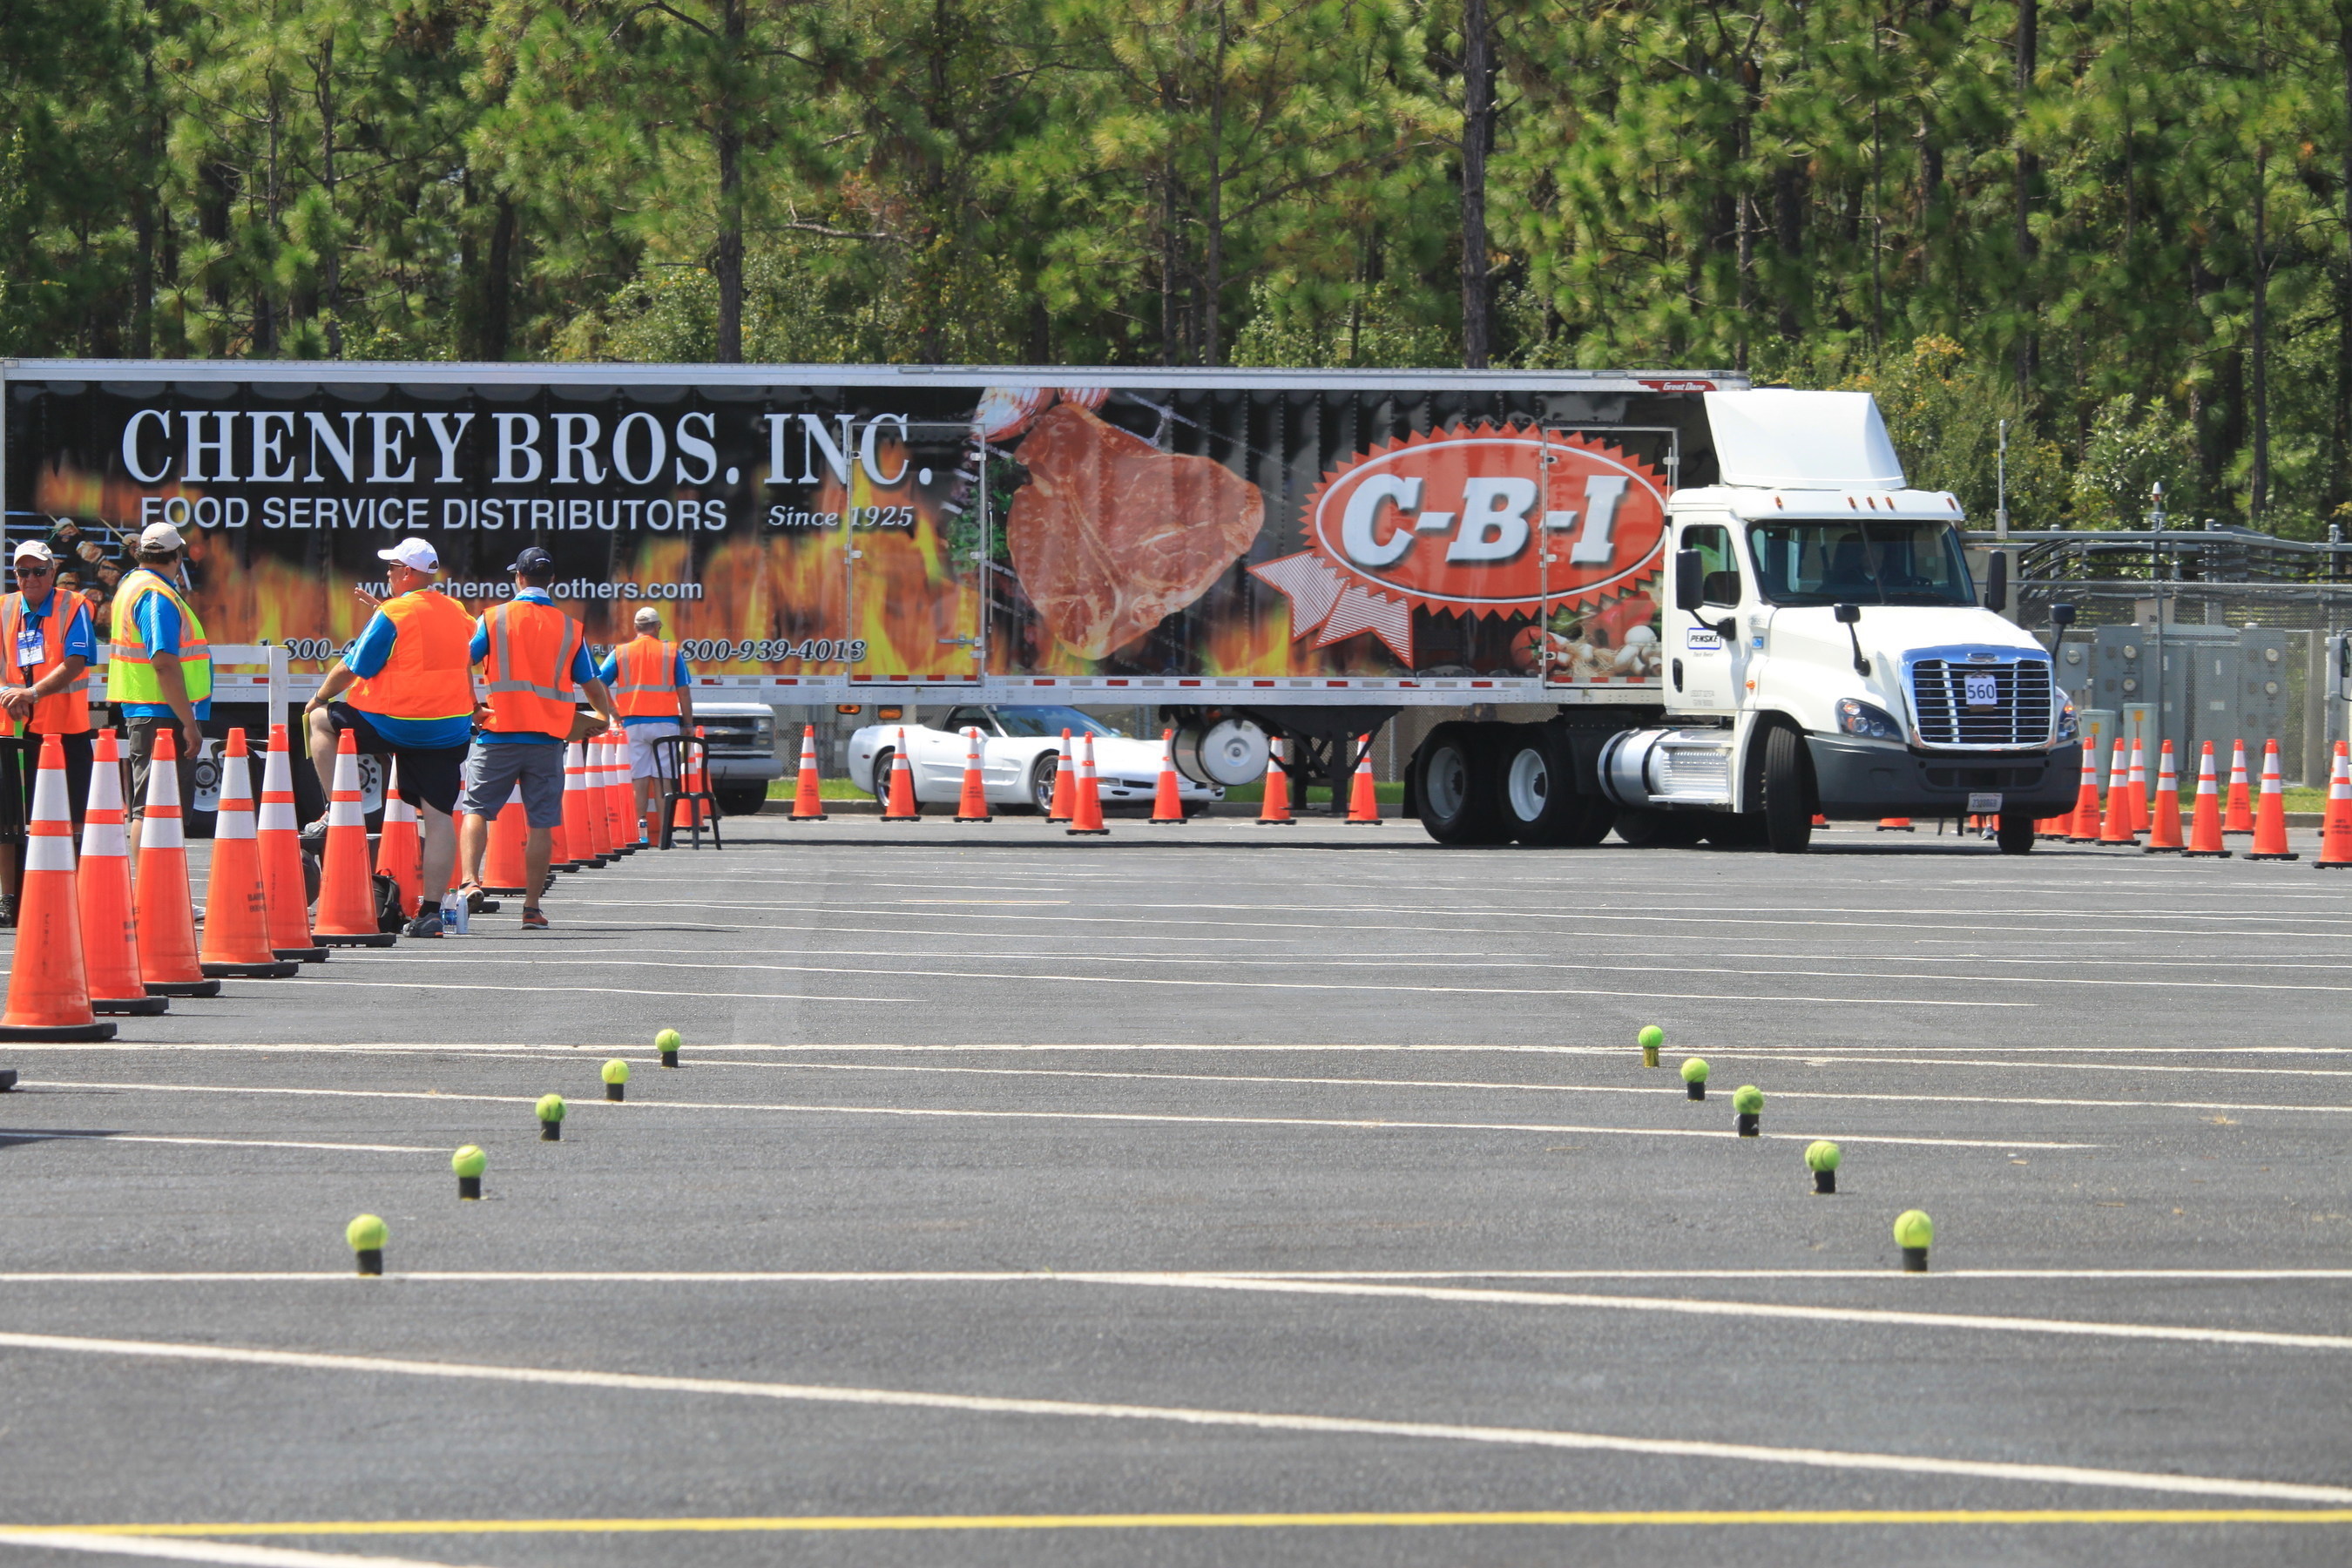 In the U.S., foodservice distributors deliver about 25 million cases of food and other products each day to restaurants and other professional kitchens. During the IFDA Truck Driving Championship (above), a driver in the 48-foot tractor-trailer category takes on the "right turn" challenge where a rear axle tire had to be within 18 inches of the cone to score.